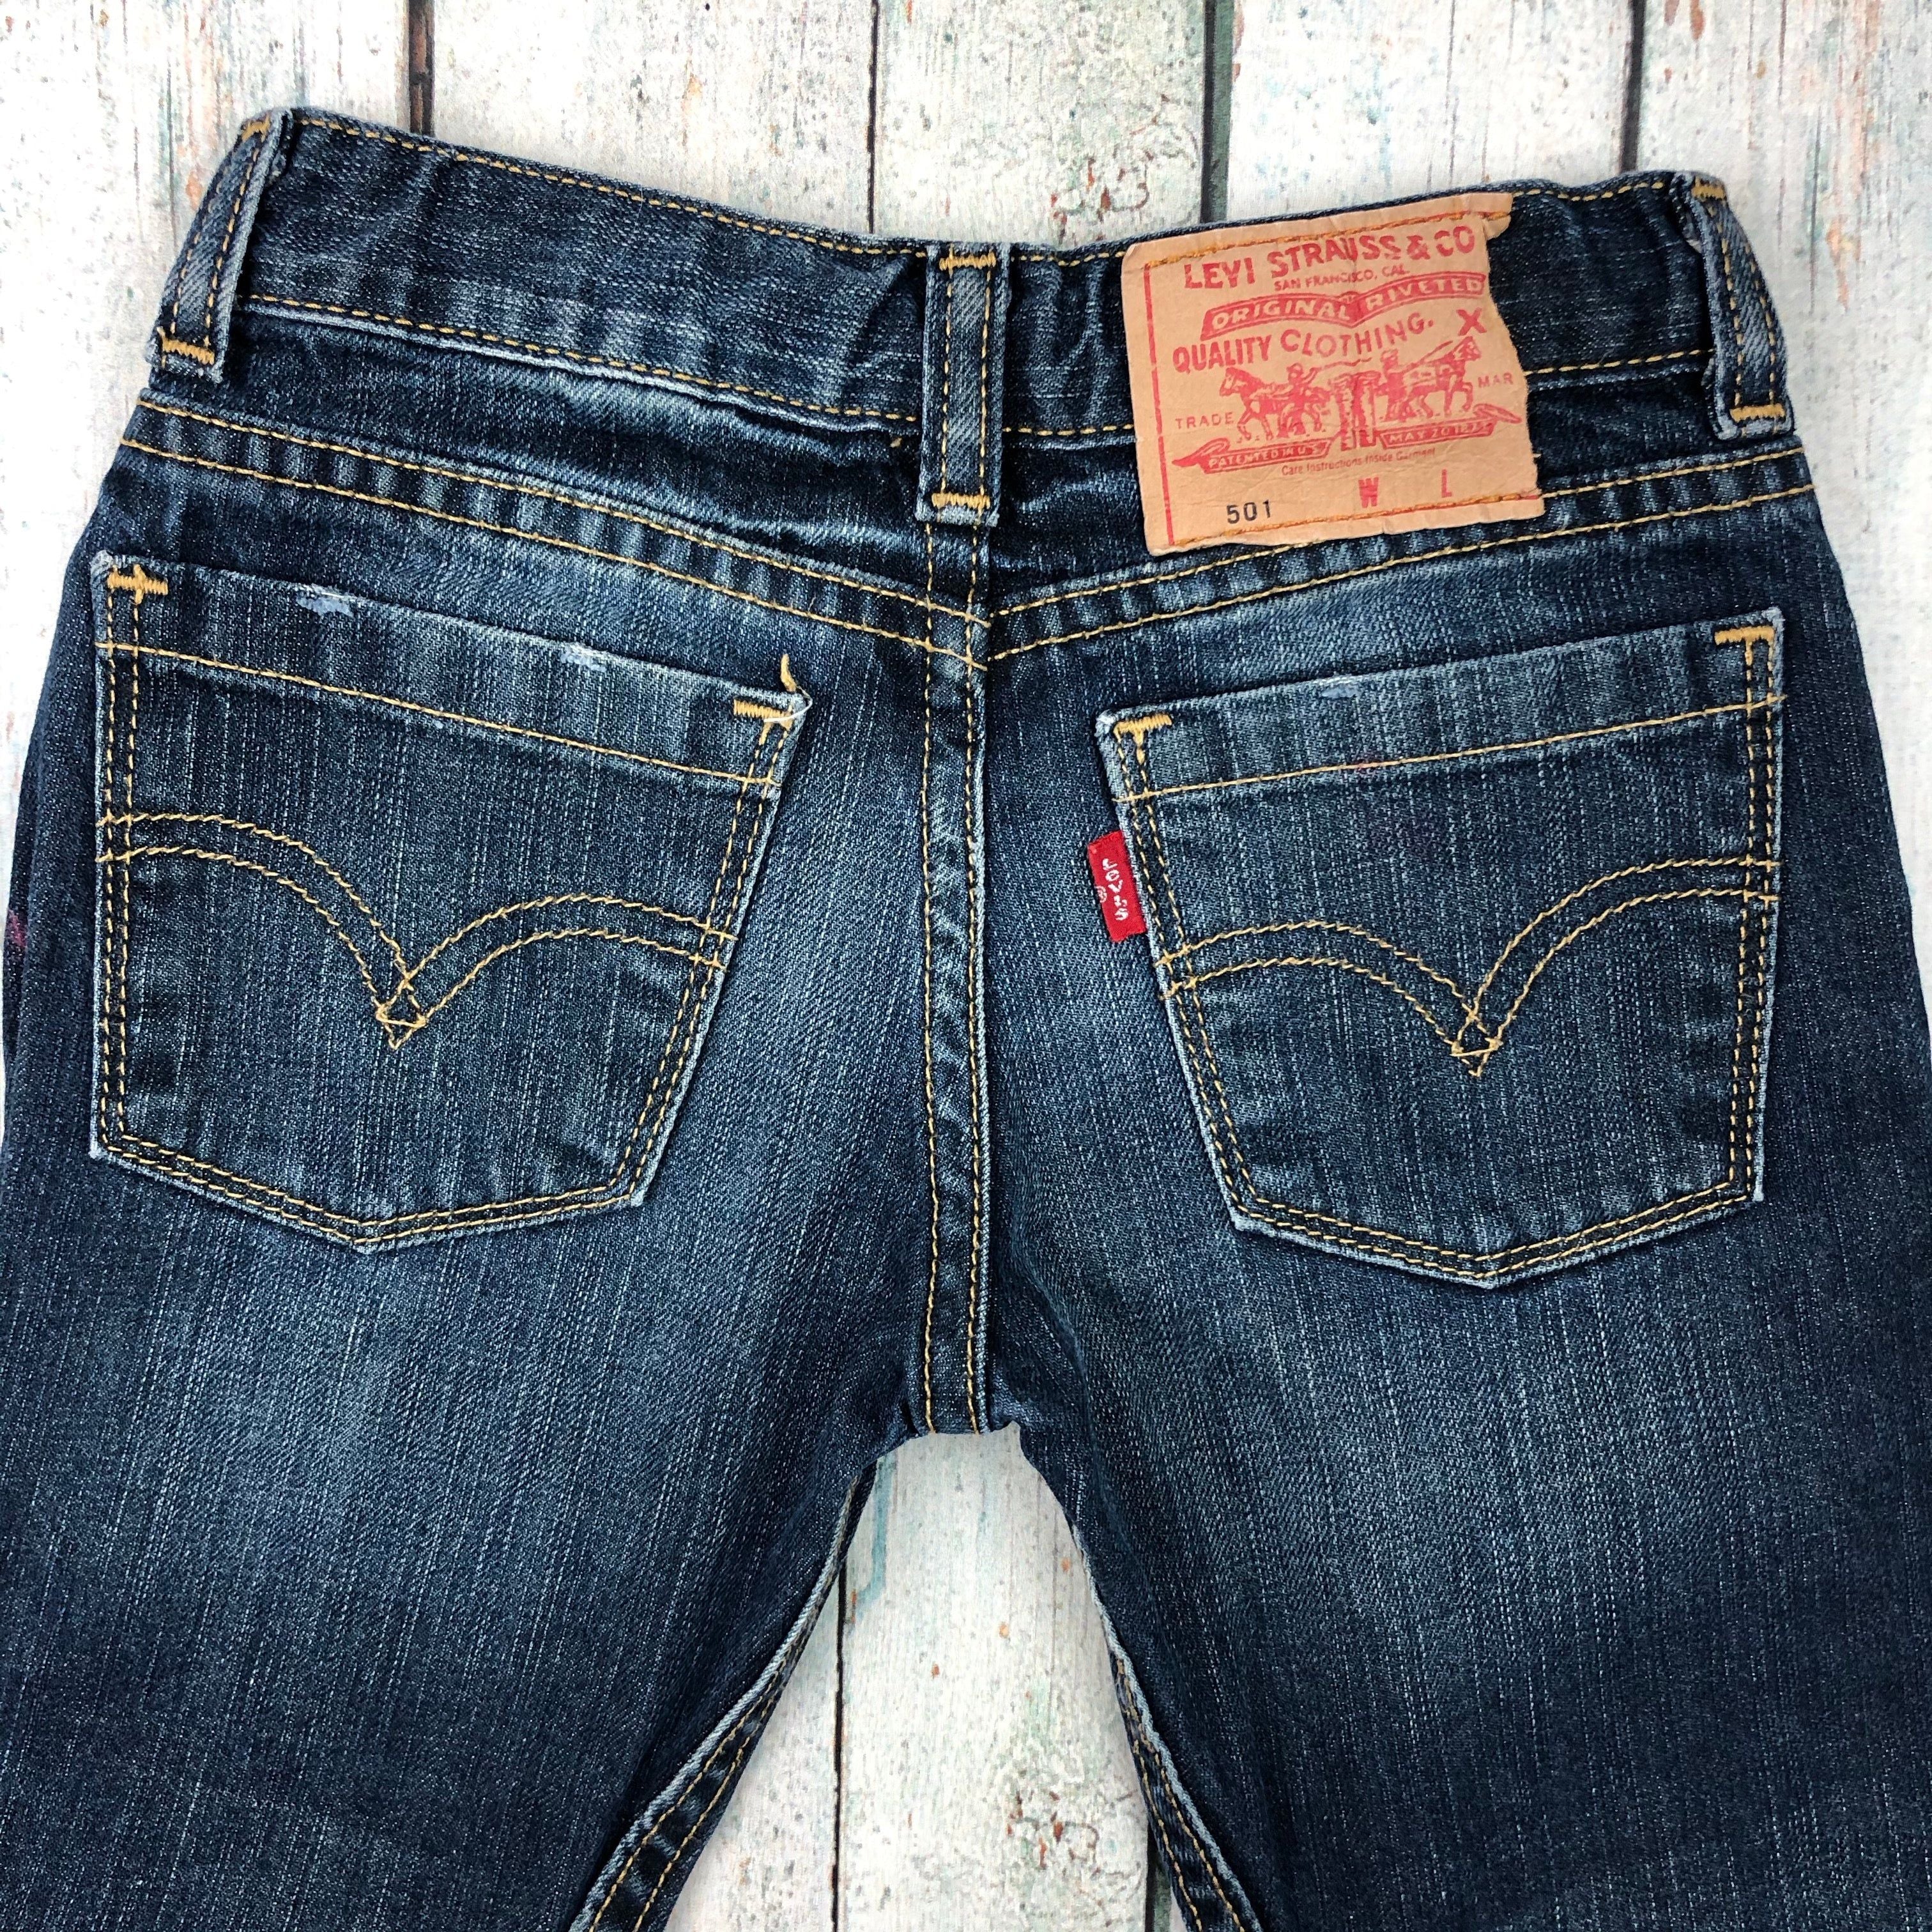 size 4 in levis jeans